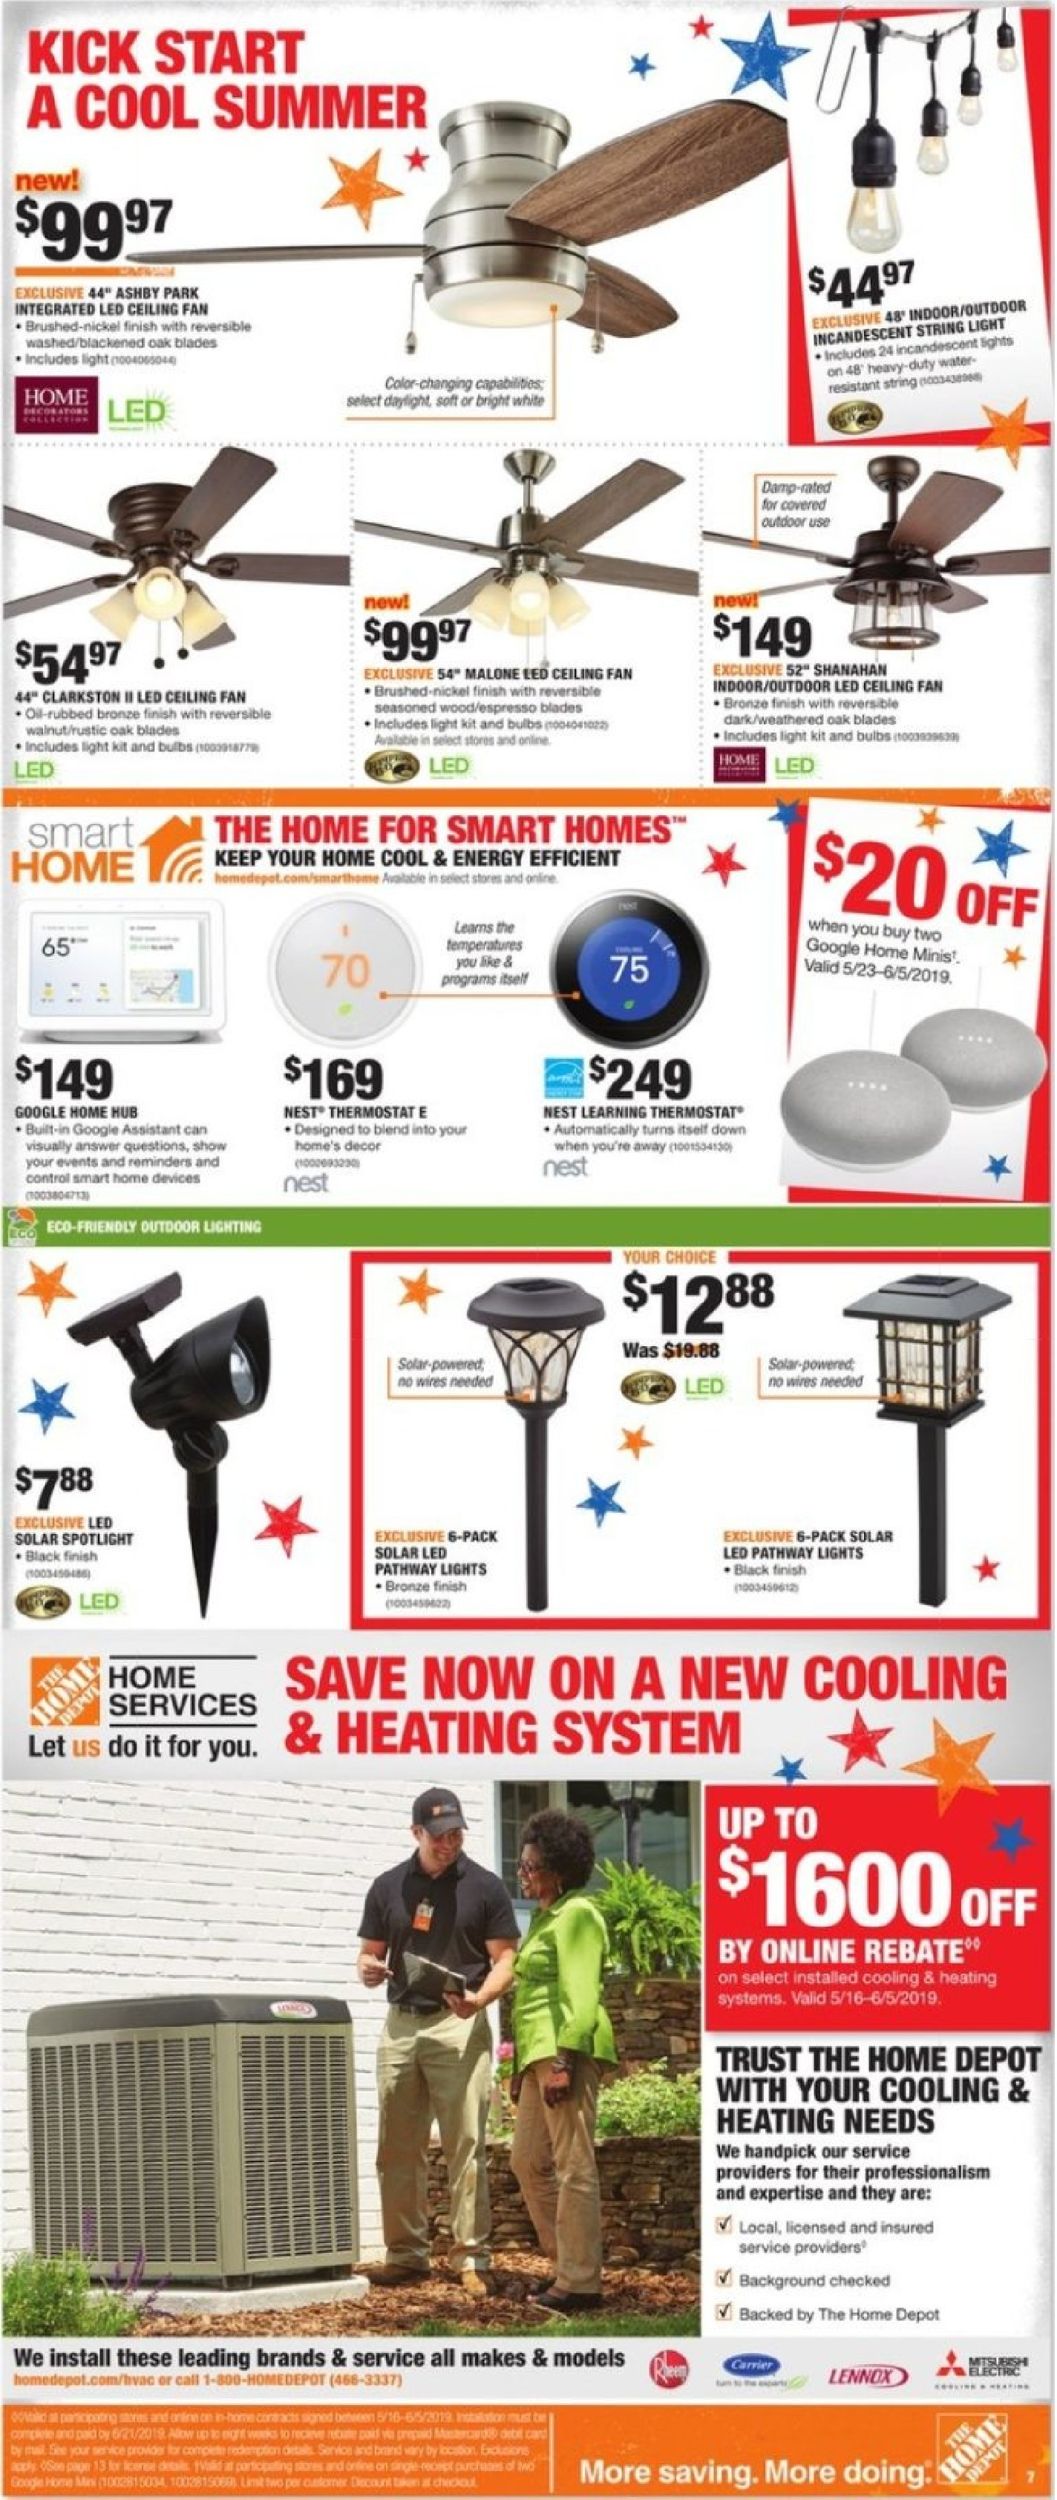 Home Depot Current weekly ad 05/23 - 05/29/2019 [7] - frequent-ads.com